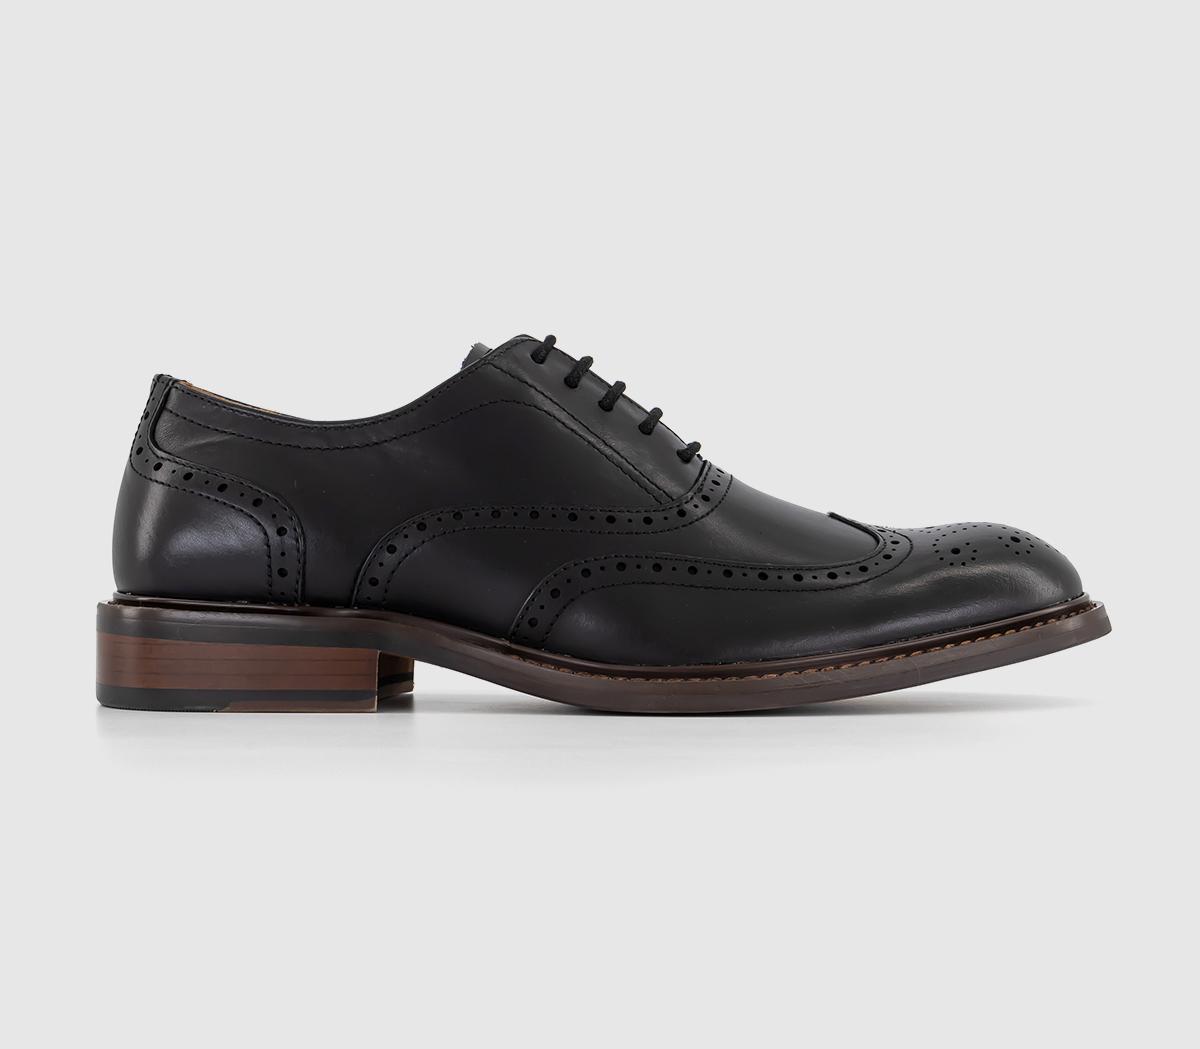 OFFICE Maxwell Oxford Brogues Black Leather - Mens Brogues